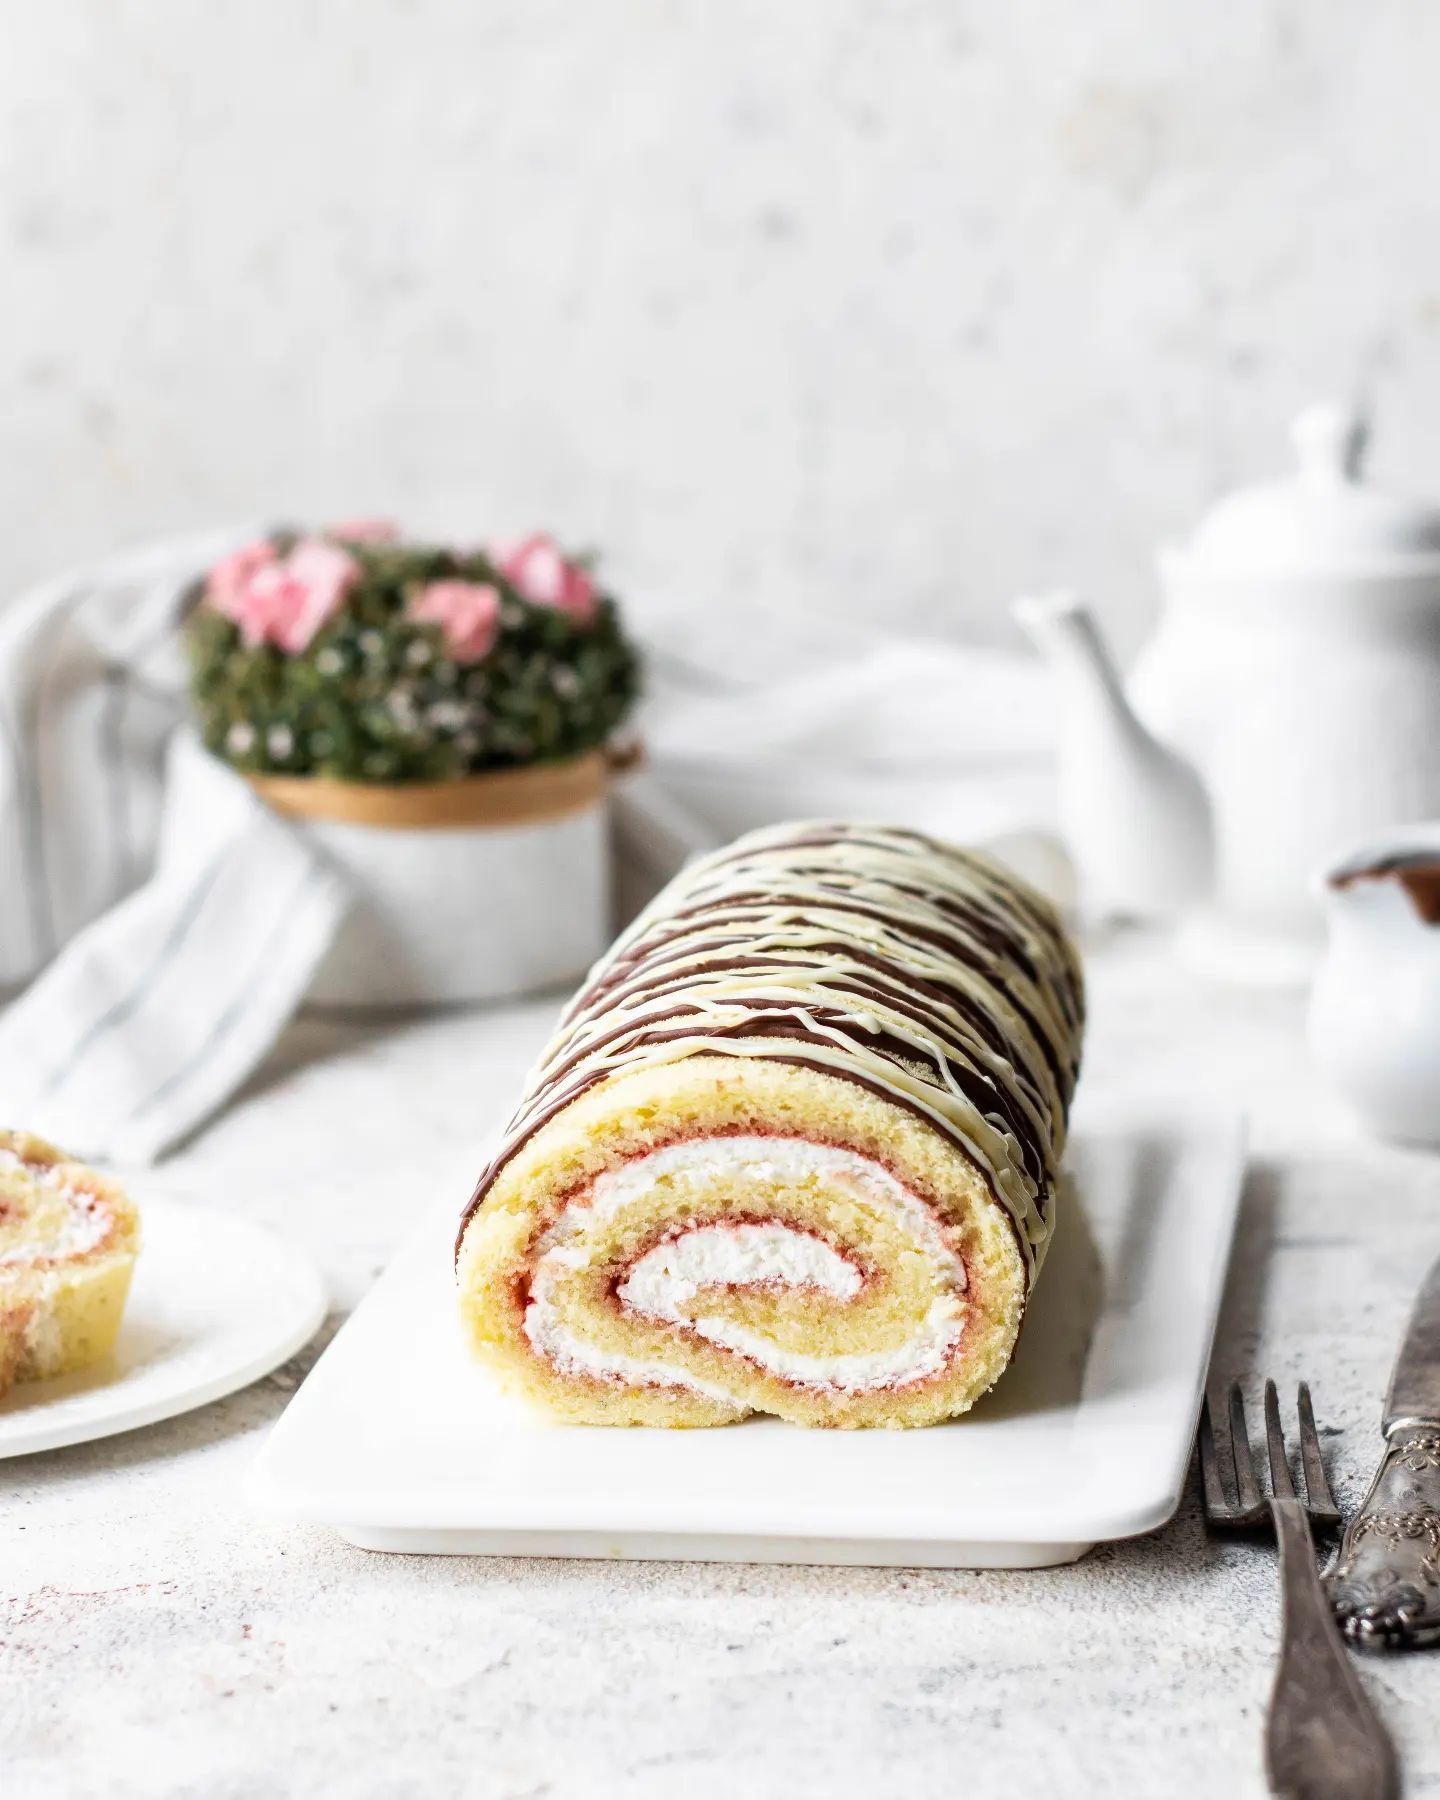 The perfect homemade sponge roll